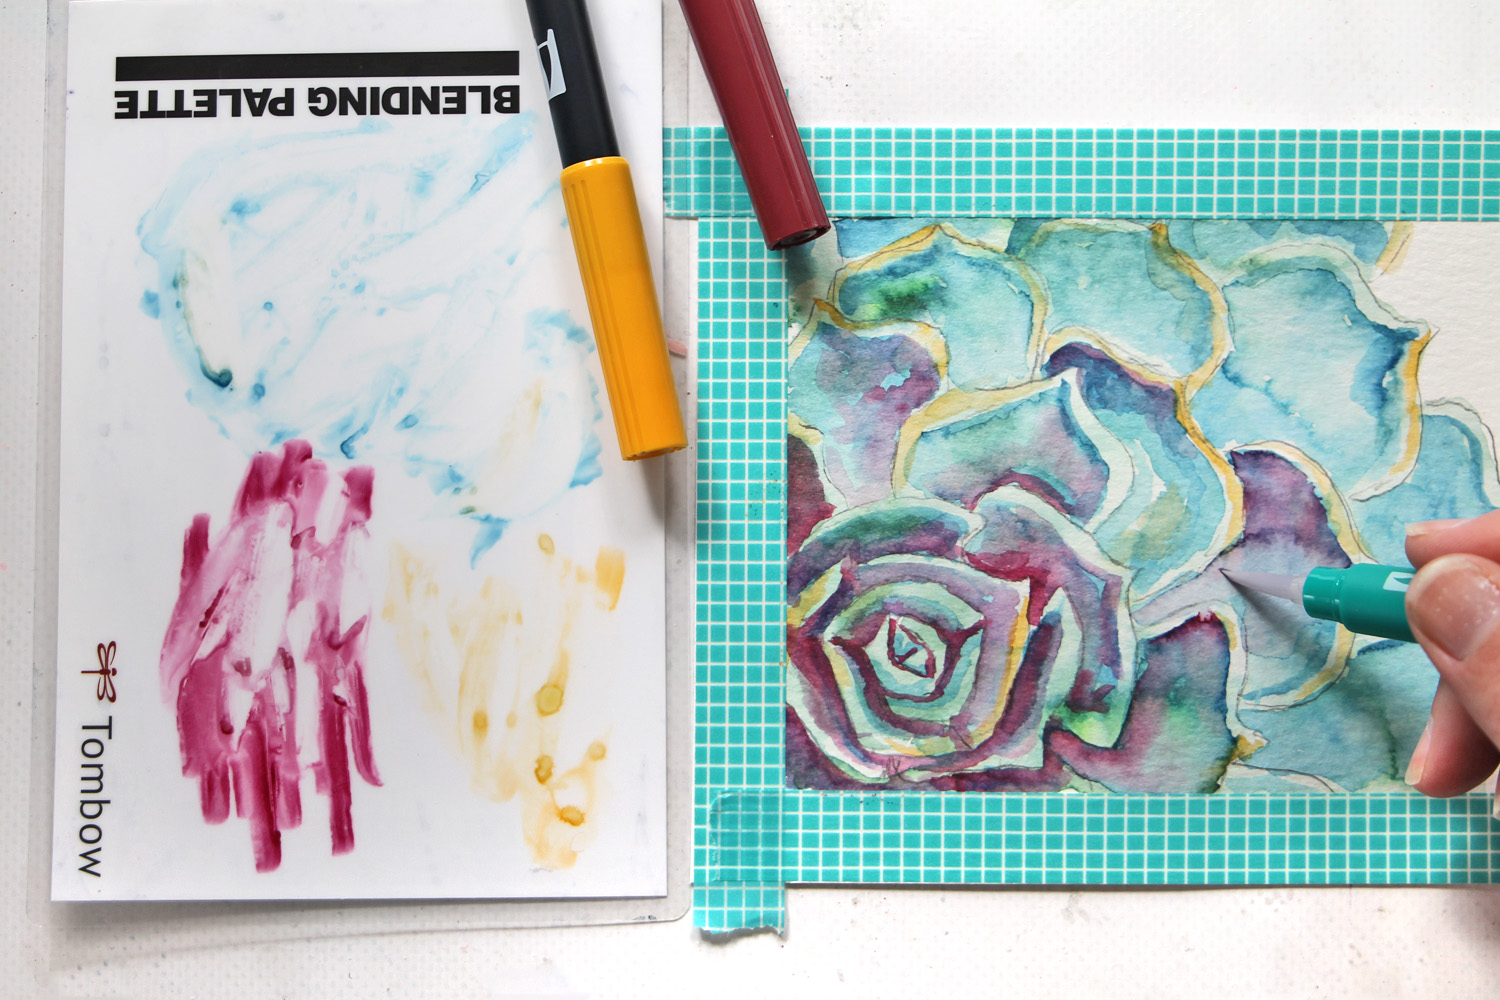 Learn how to paint a watercolor succulent using Tombow's Watercolor Set and this tutorial by @studiokatie #tombowusa #tombow #watercolor